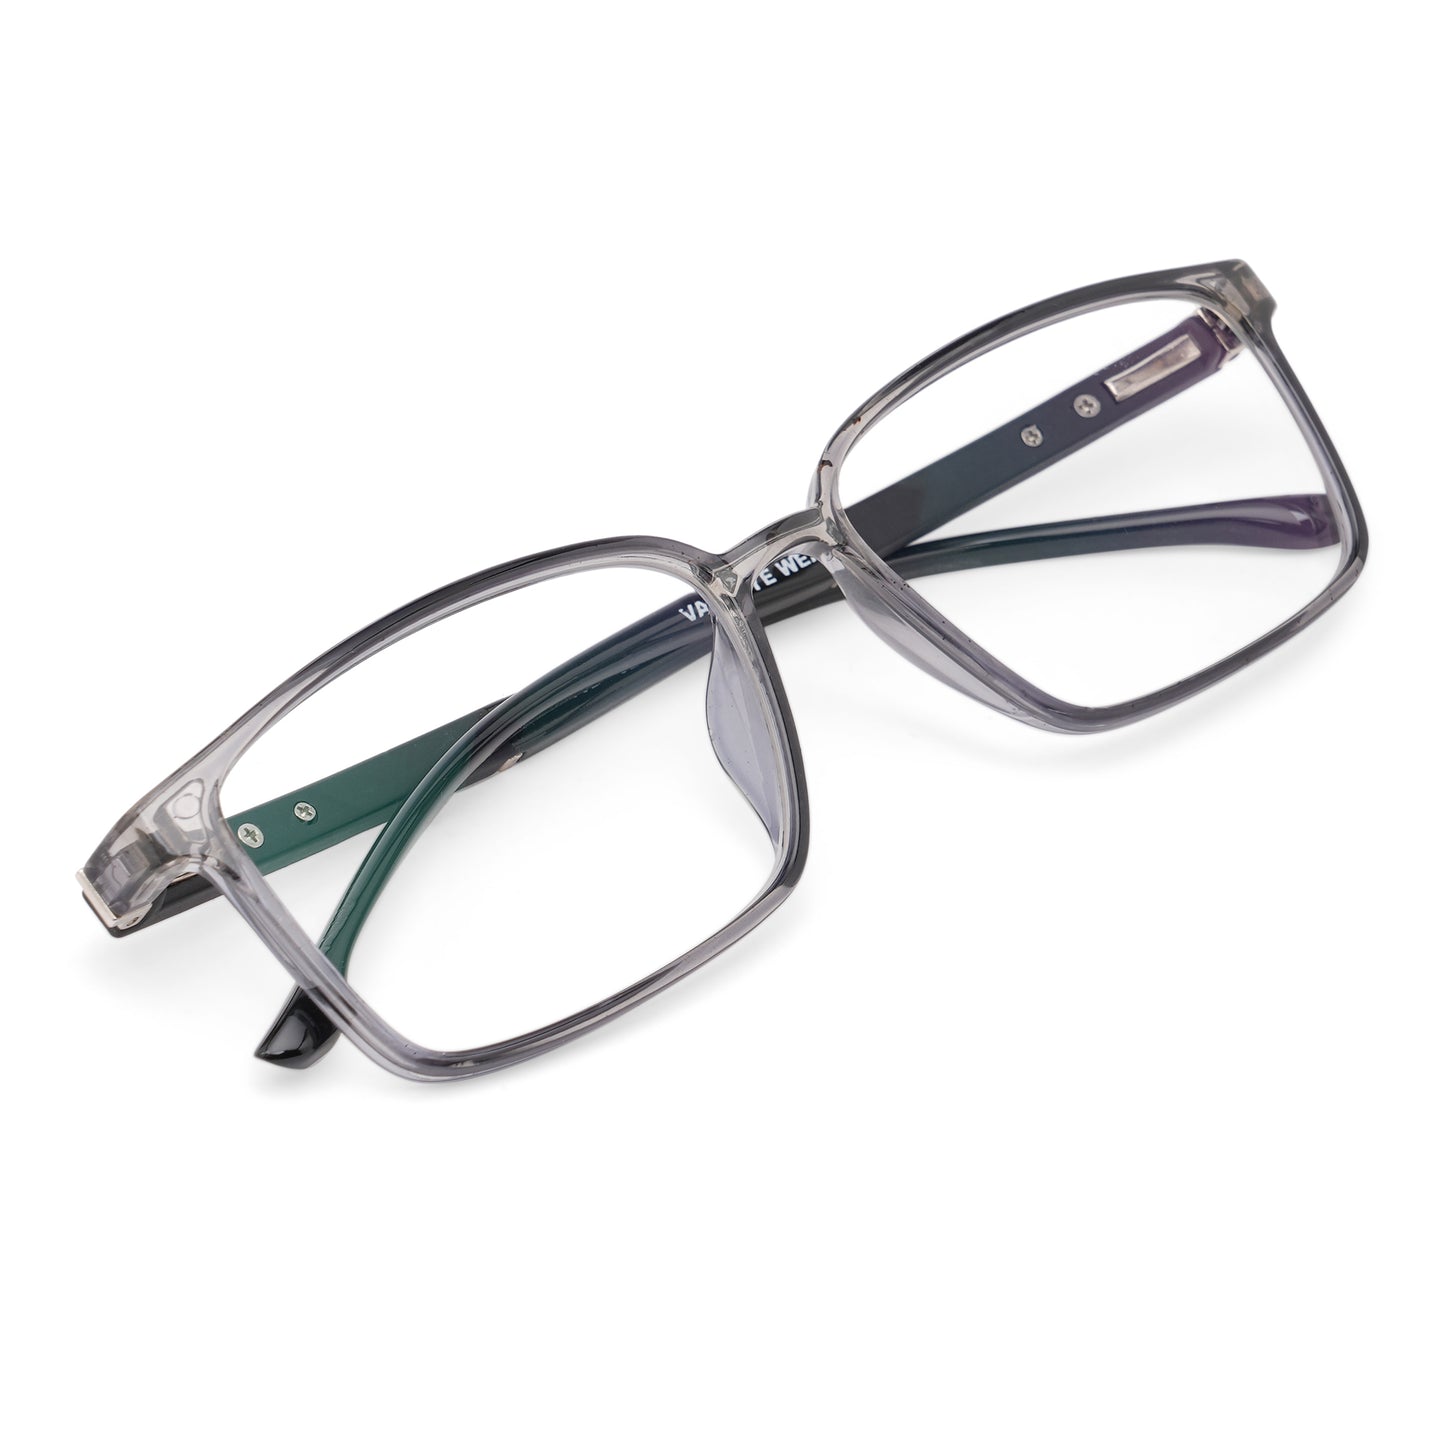 Blue Ray Blocking Rectangle TR90 Computer Glasses (8002 Grey)